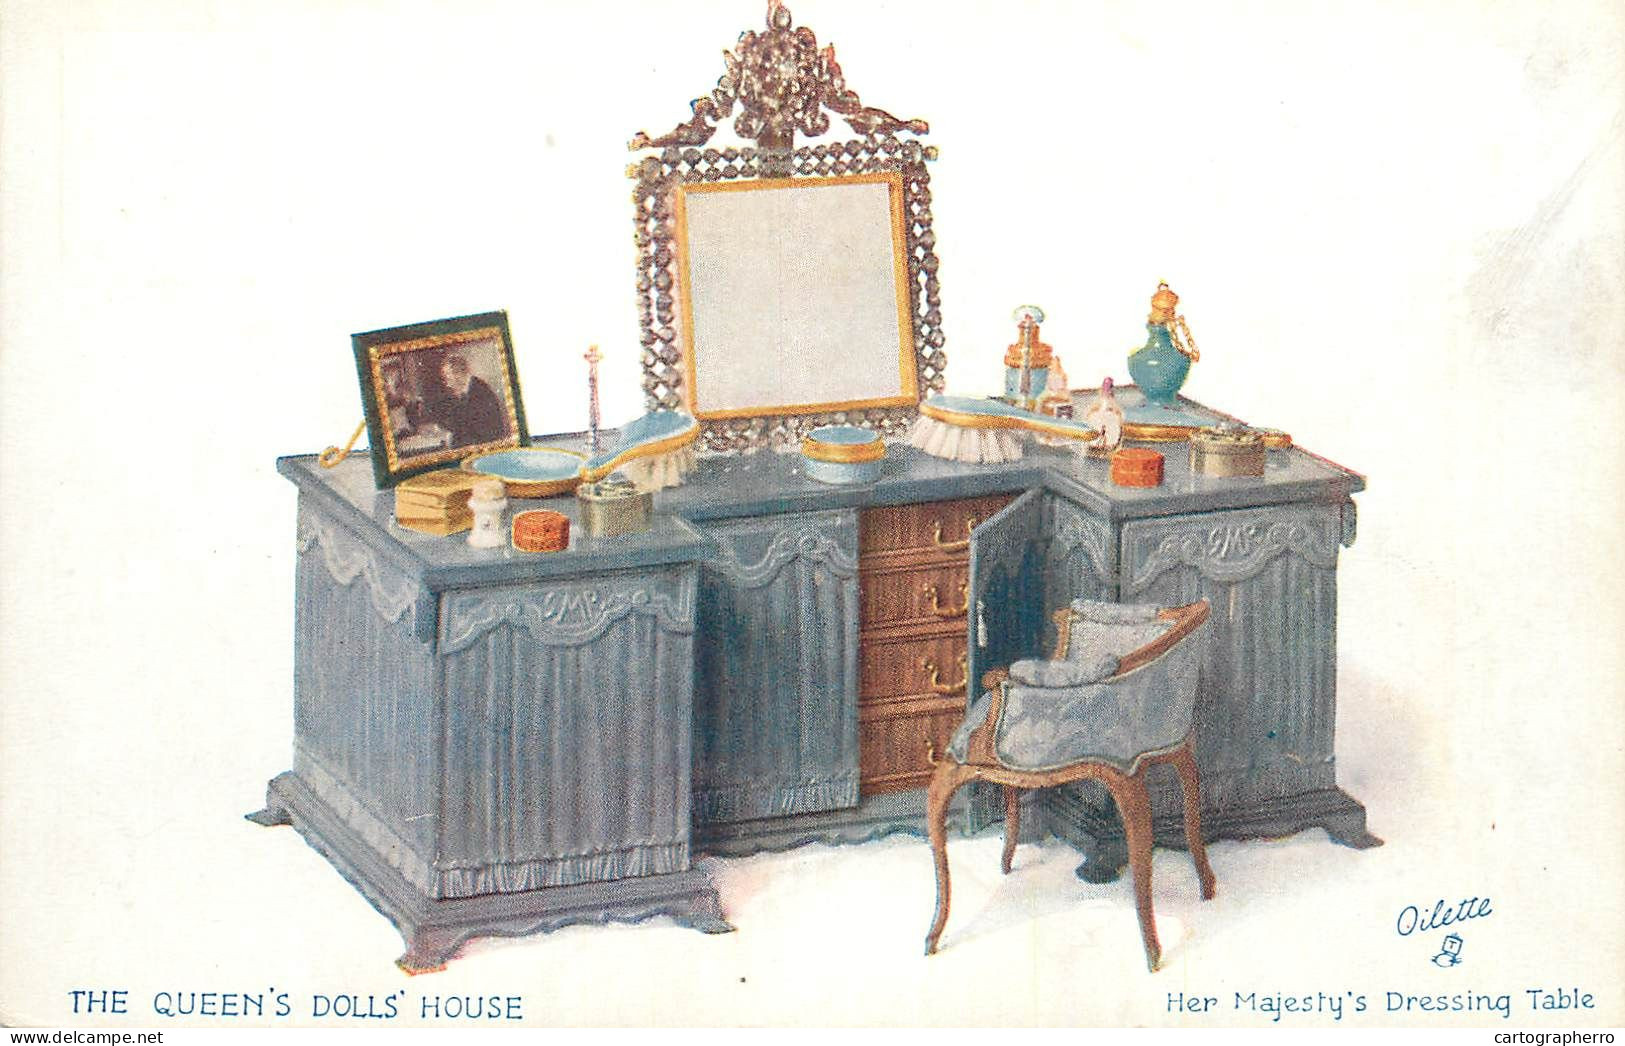 Raphael Tuck & Sons' Oilette Postcard The Queen's Dolls House Series I - Her Majesty's Dressing Table - Tuck, Raphael